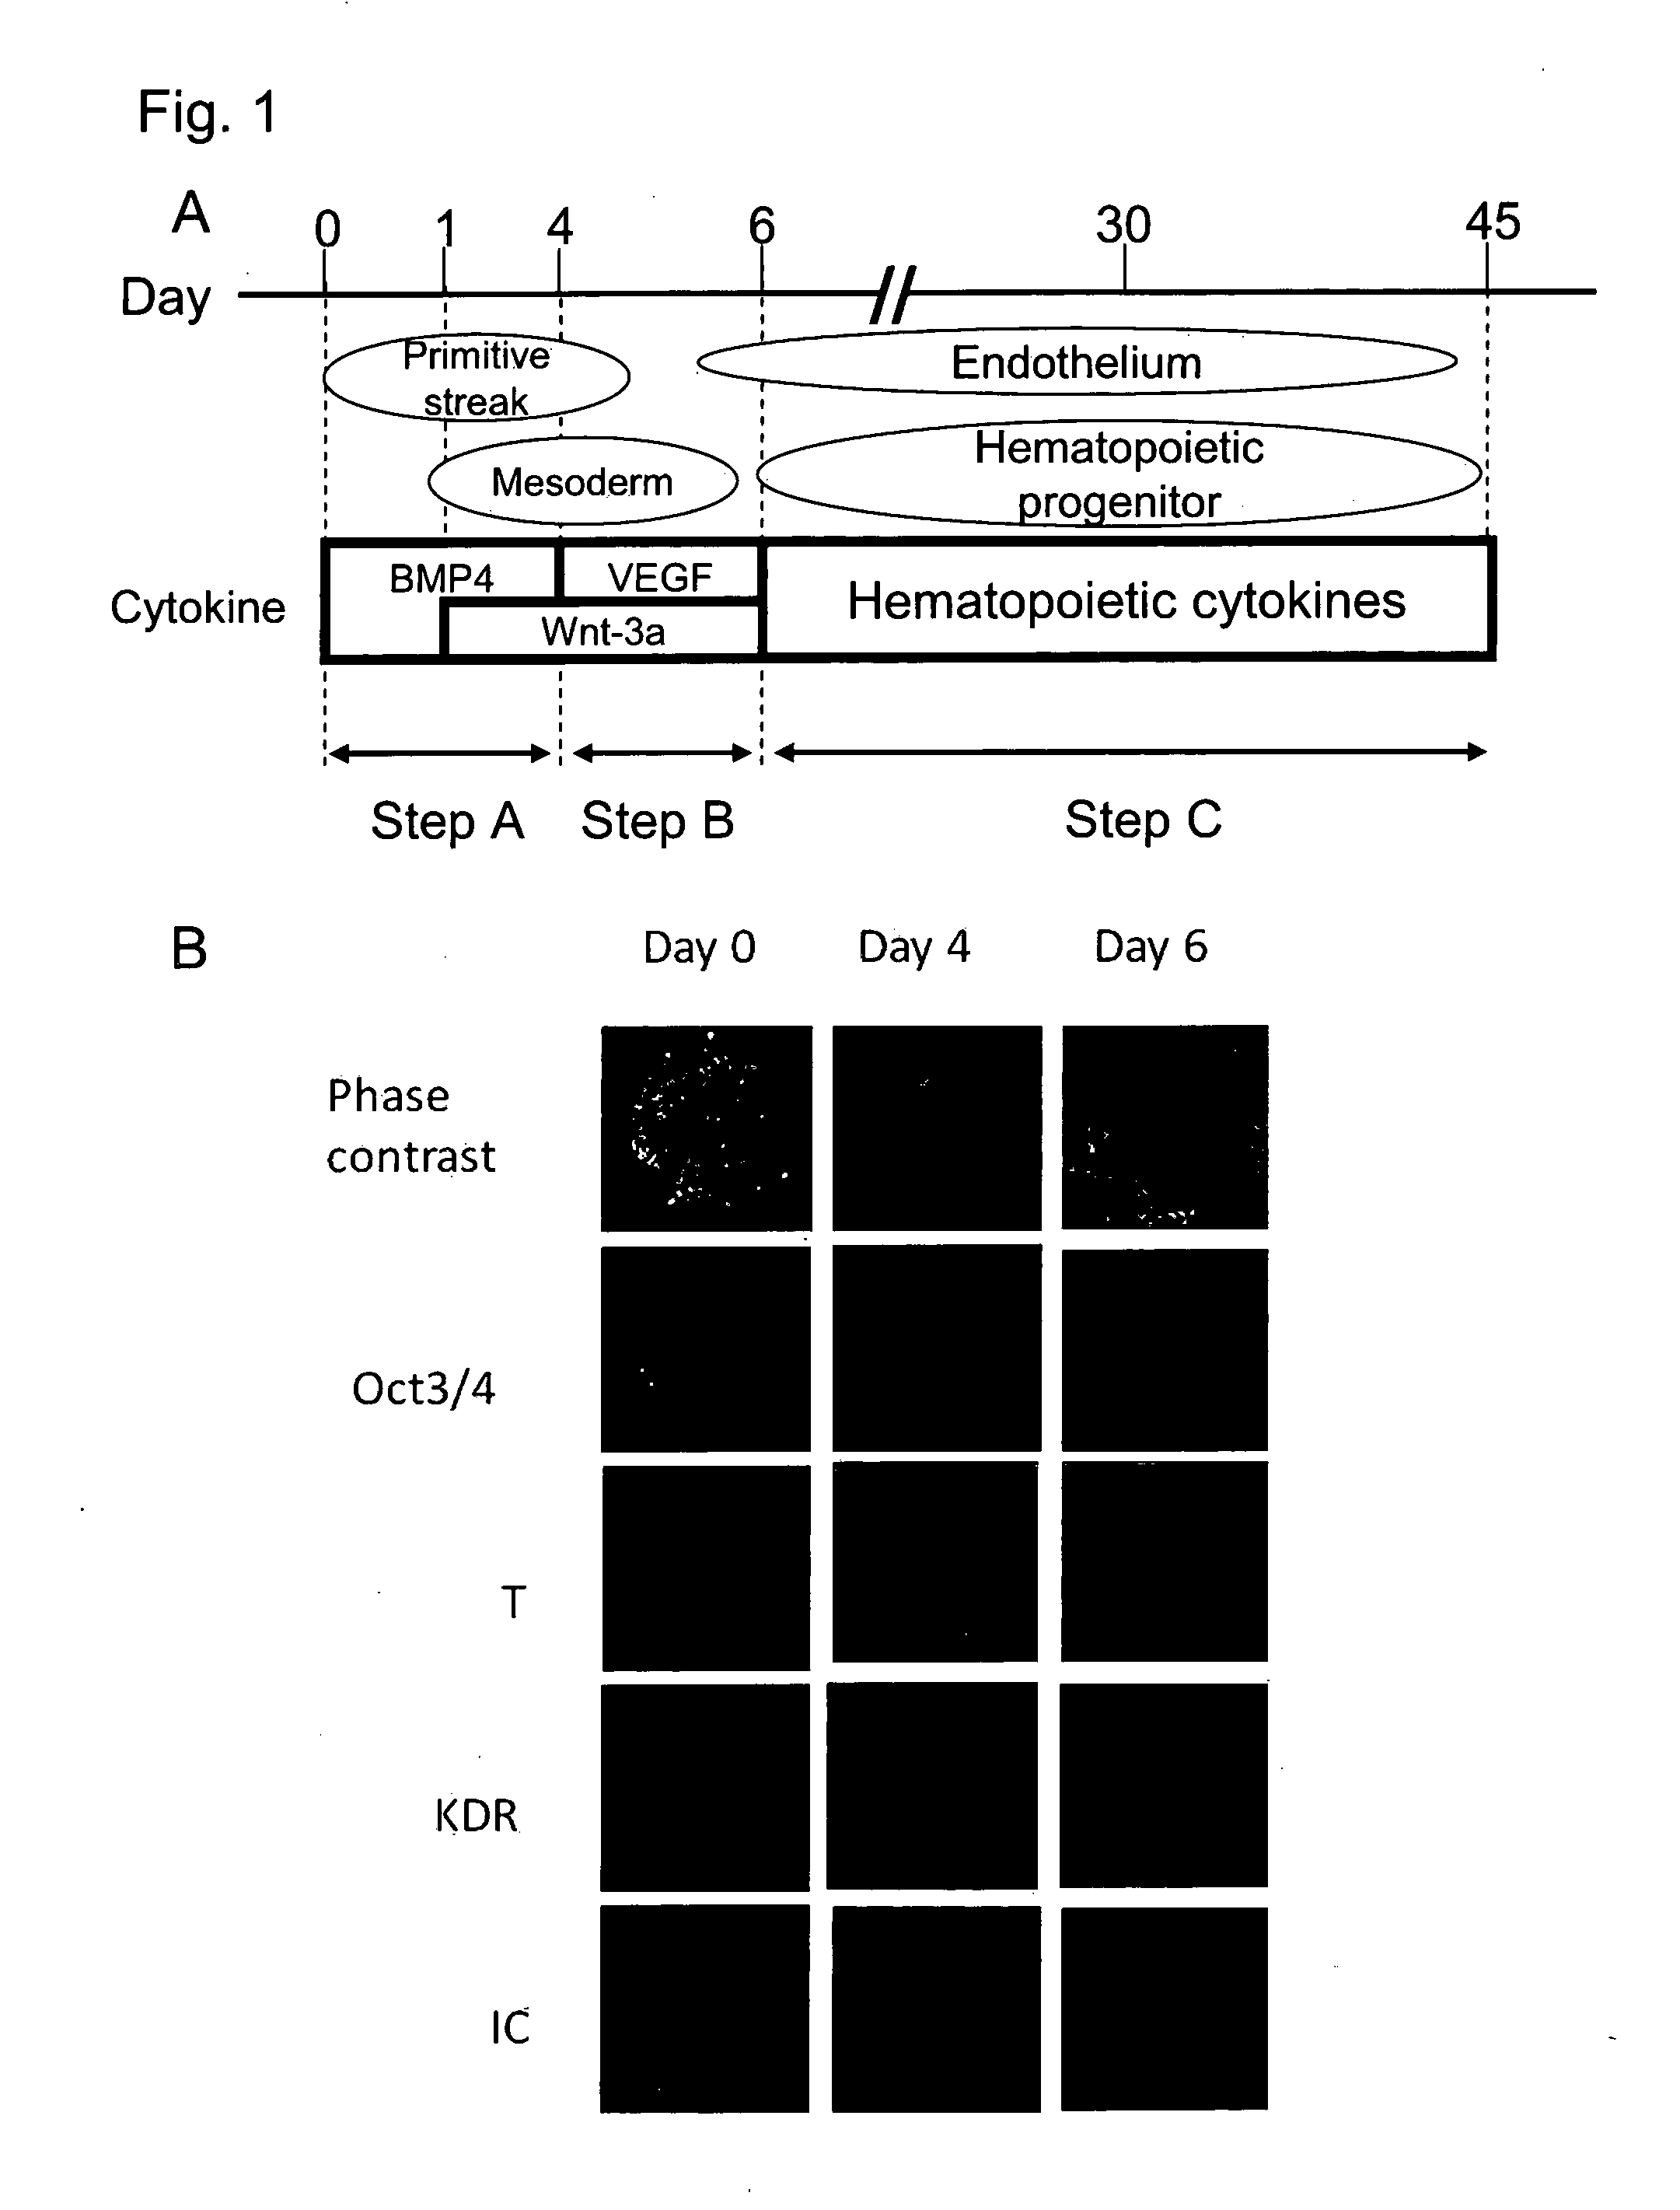 Method for inducing differentiation of pluripotent stem cells into mesodermal cells